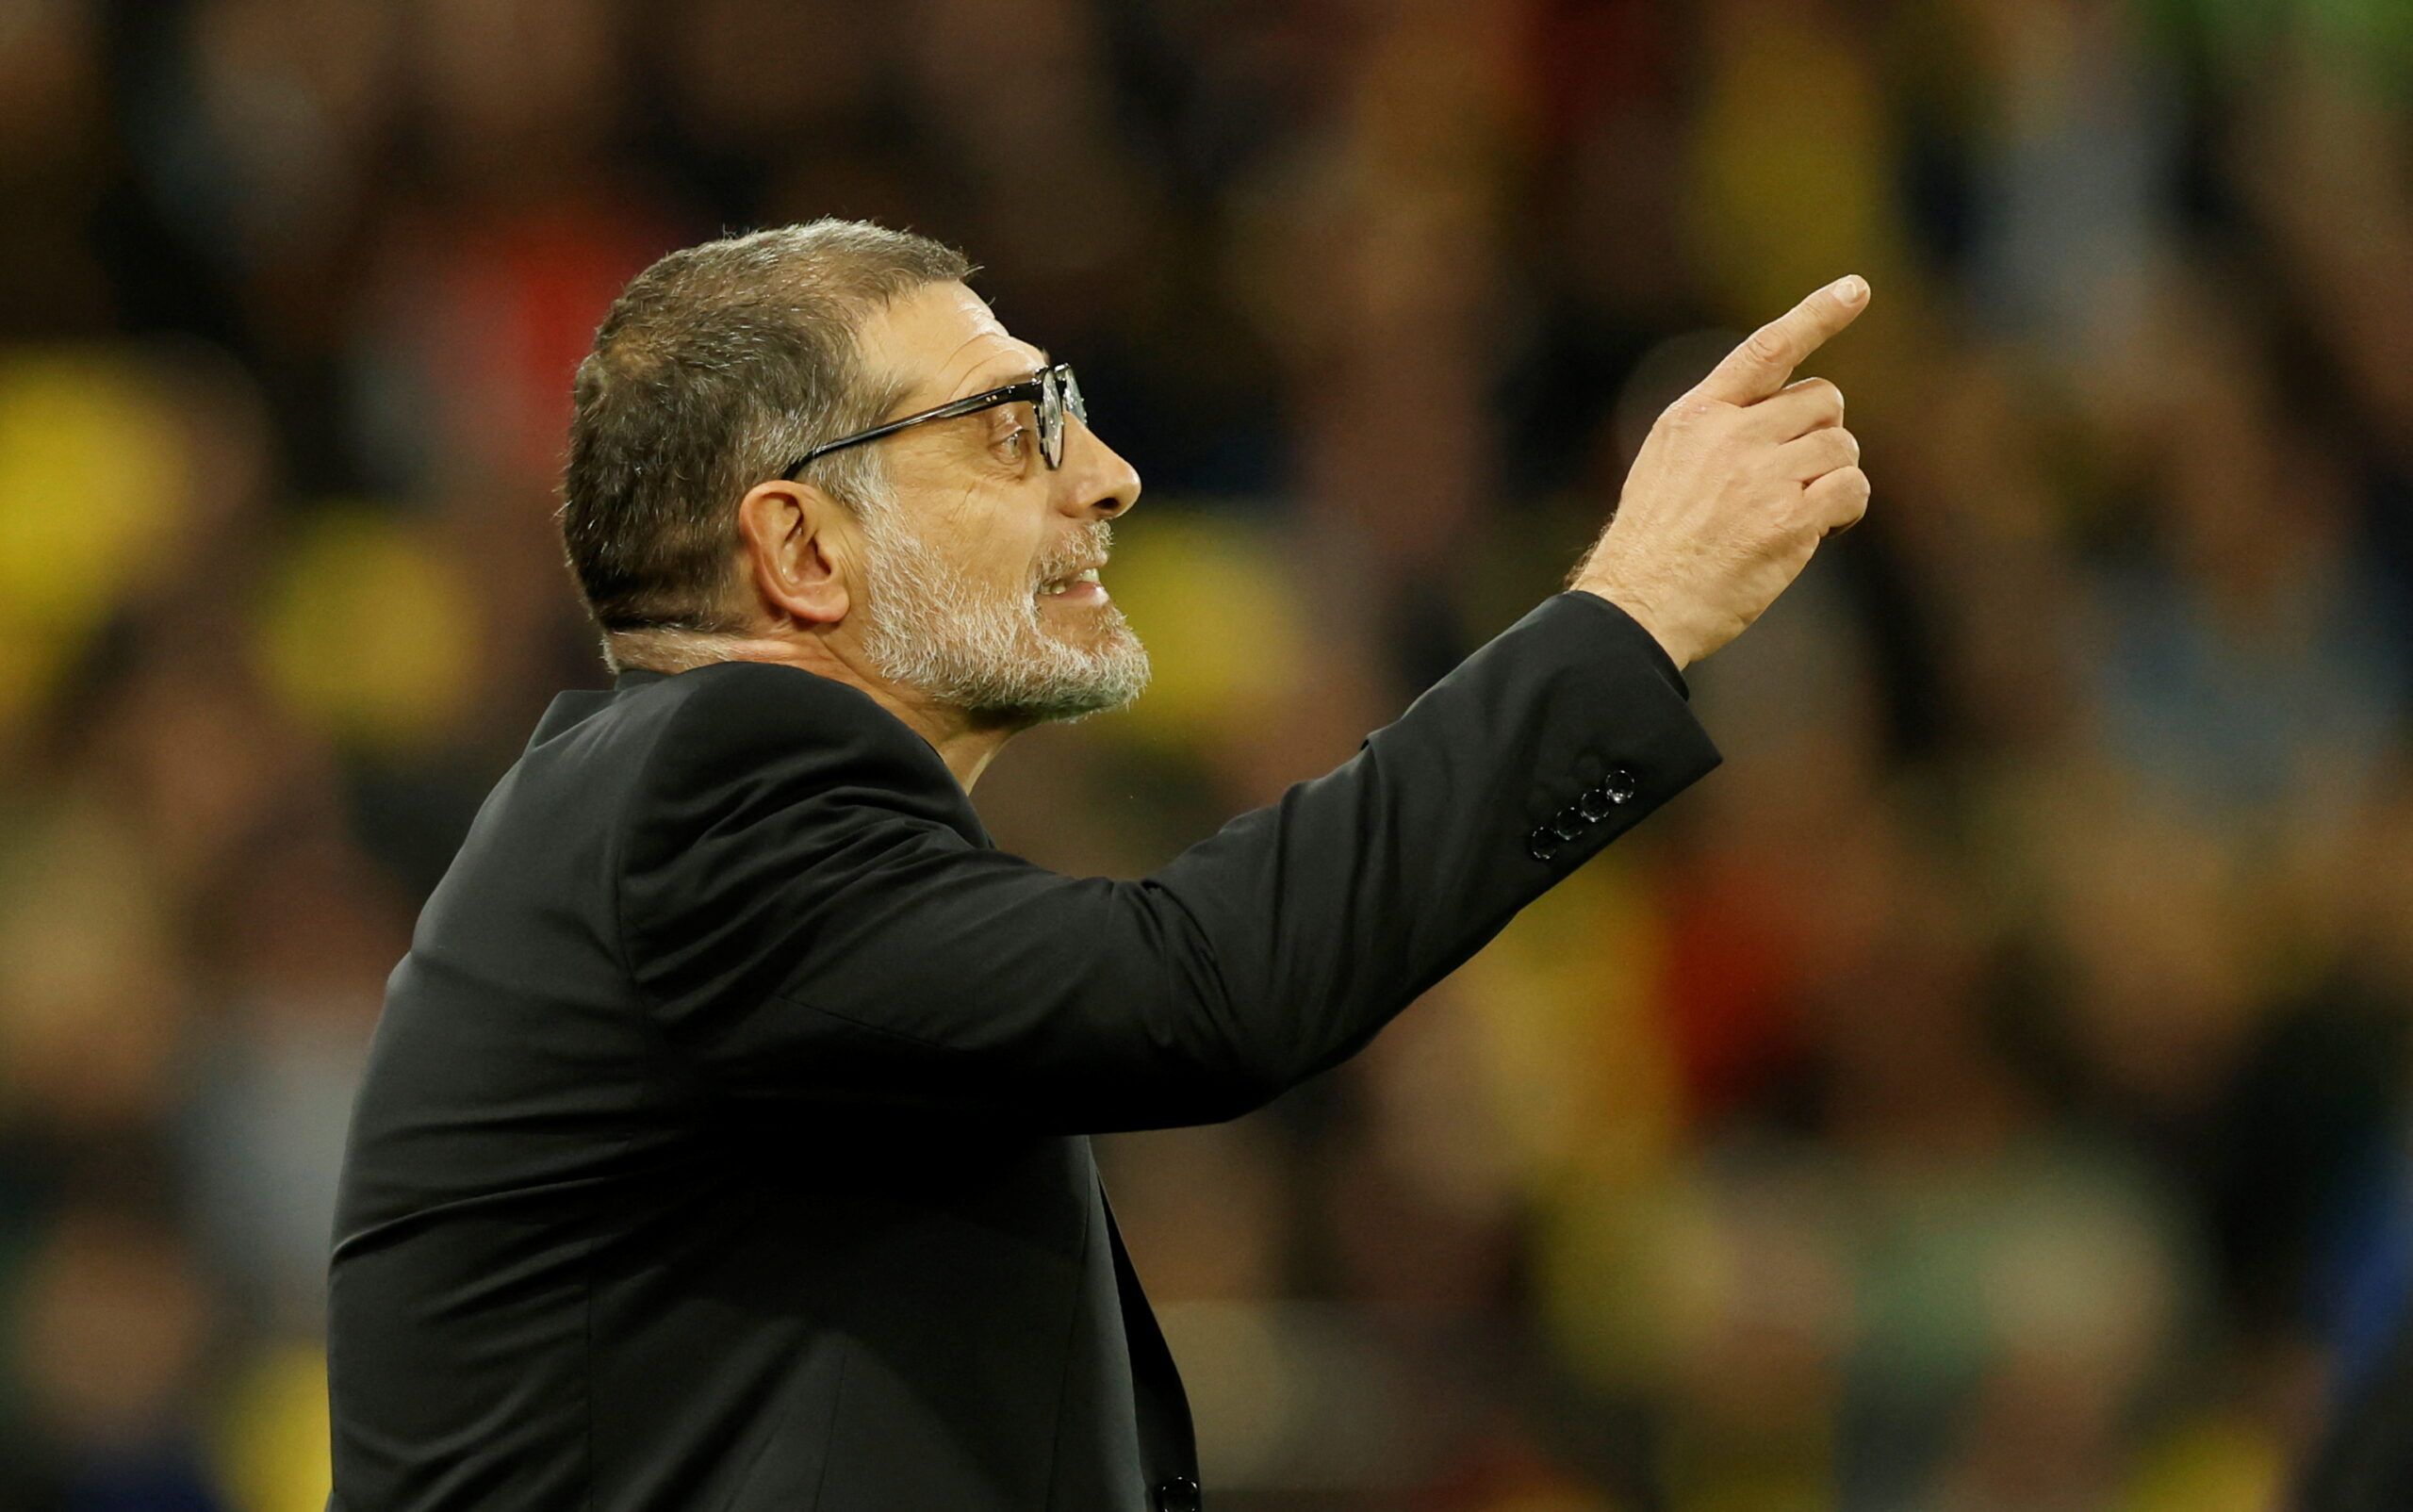 Soccer Football - Championship - Watford v Swansea City - Vicarage Road, Watford, Britain - October 5, 2022 Watford manager Slaven Bilic reacts  Action Images/Peter Cziborra  EDITORIAL USE ONLY. No use with unauthorized audio, video, data, fixture lists, club/league logos or 